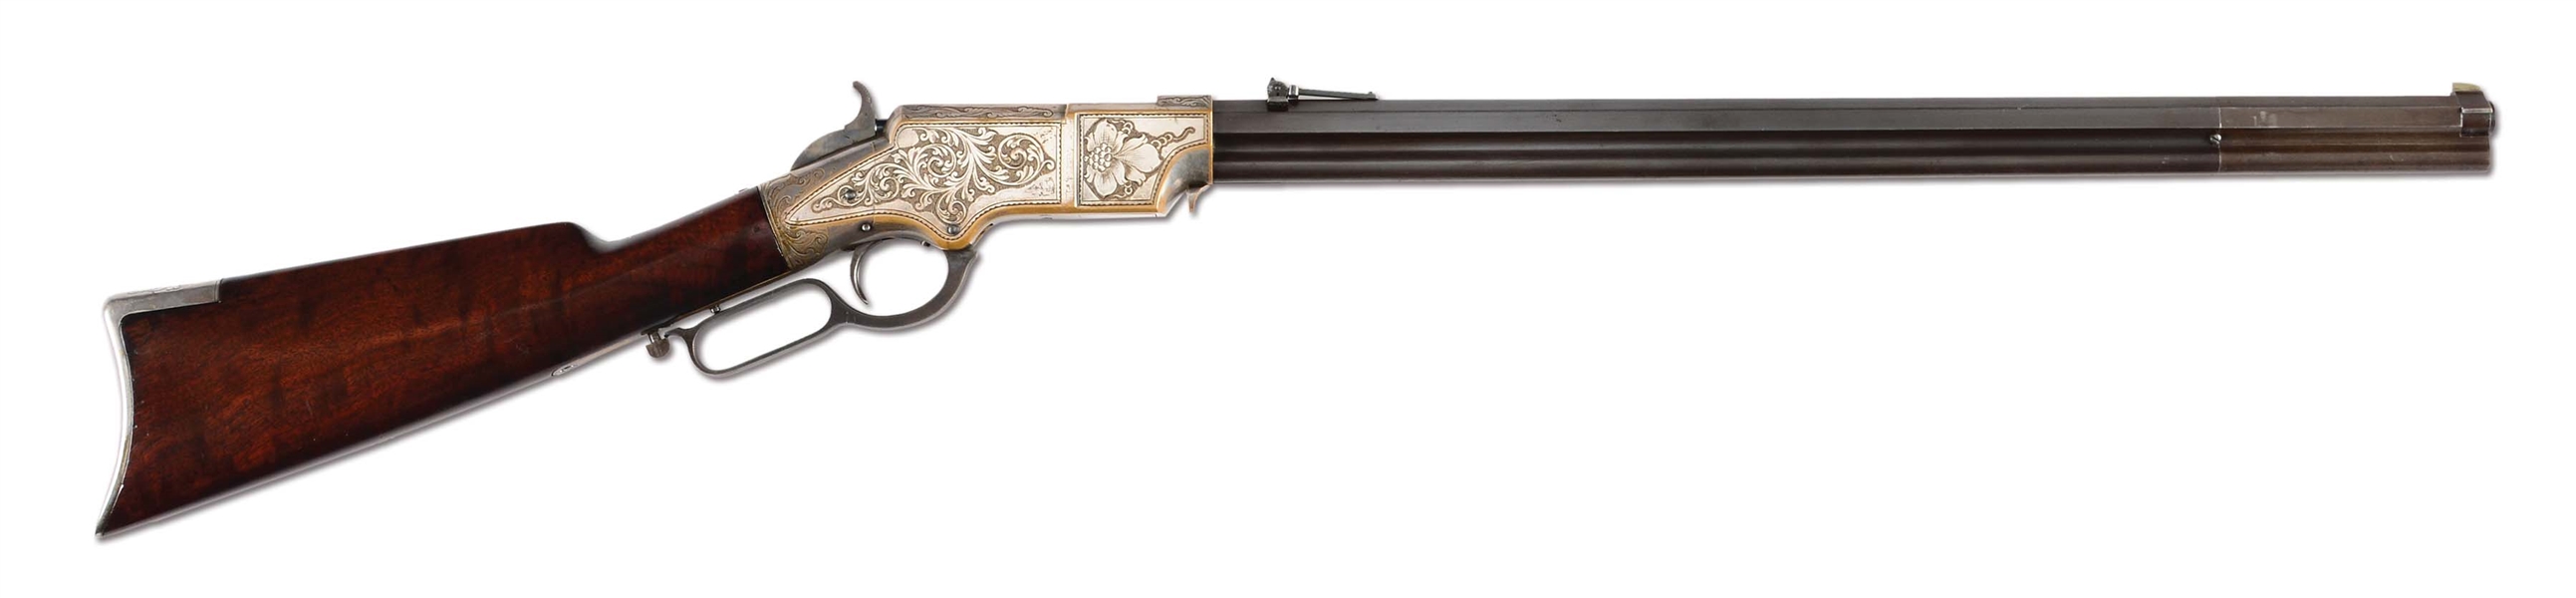 (A) SILVER PLATED & ENGRAVED NEW HAVEN ARMS HENRY RIFLE.